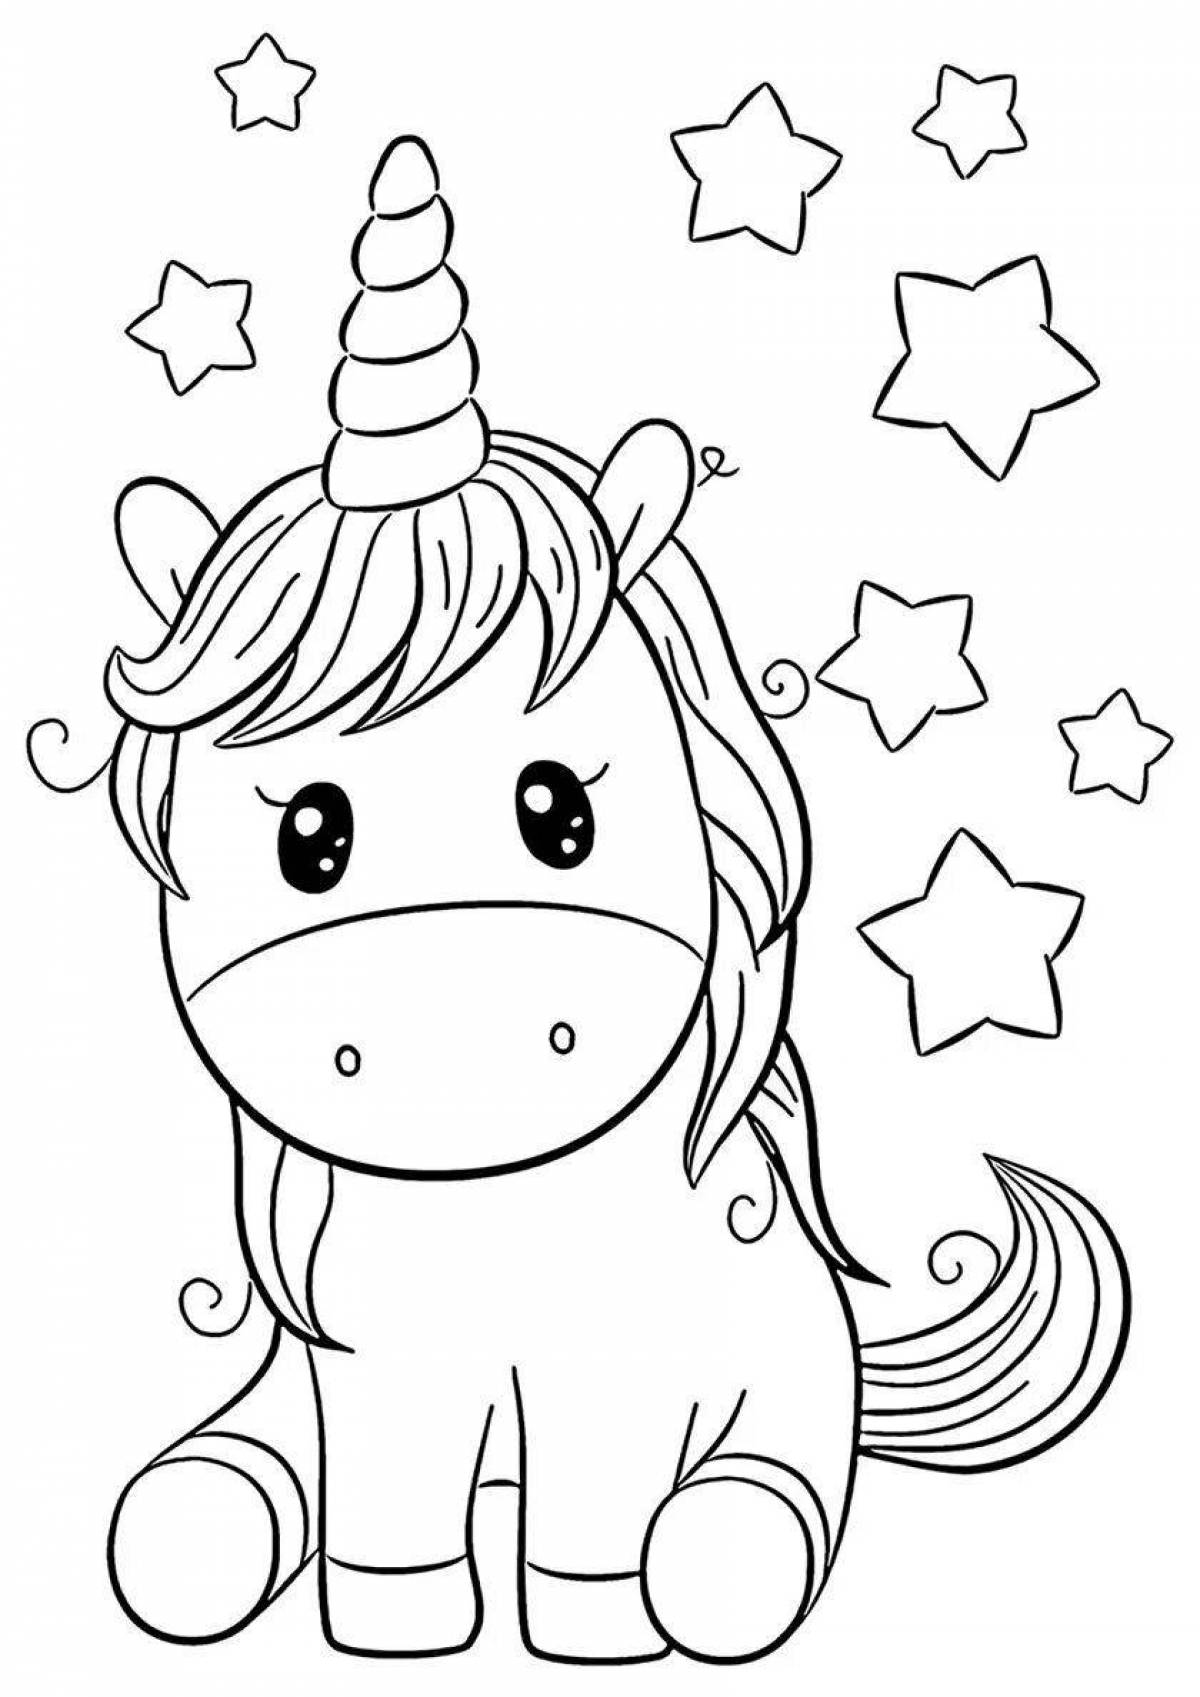 Blooming unicorn coloring page